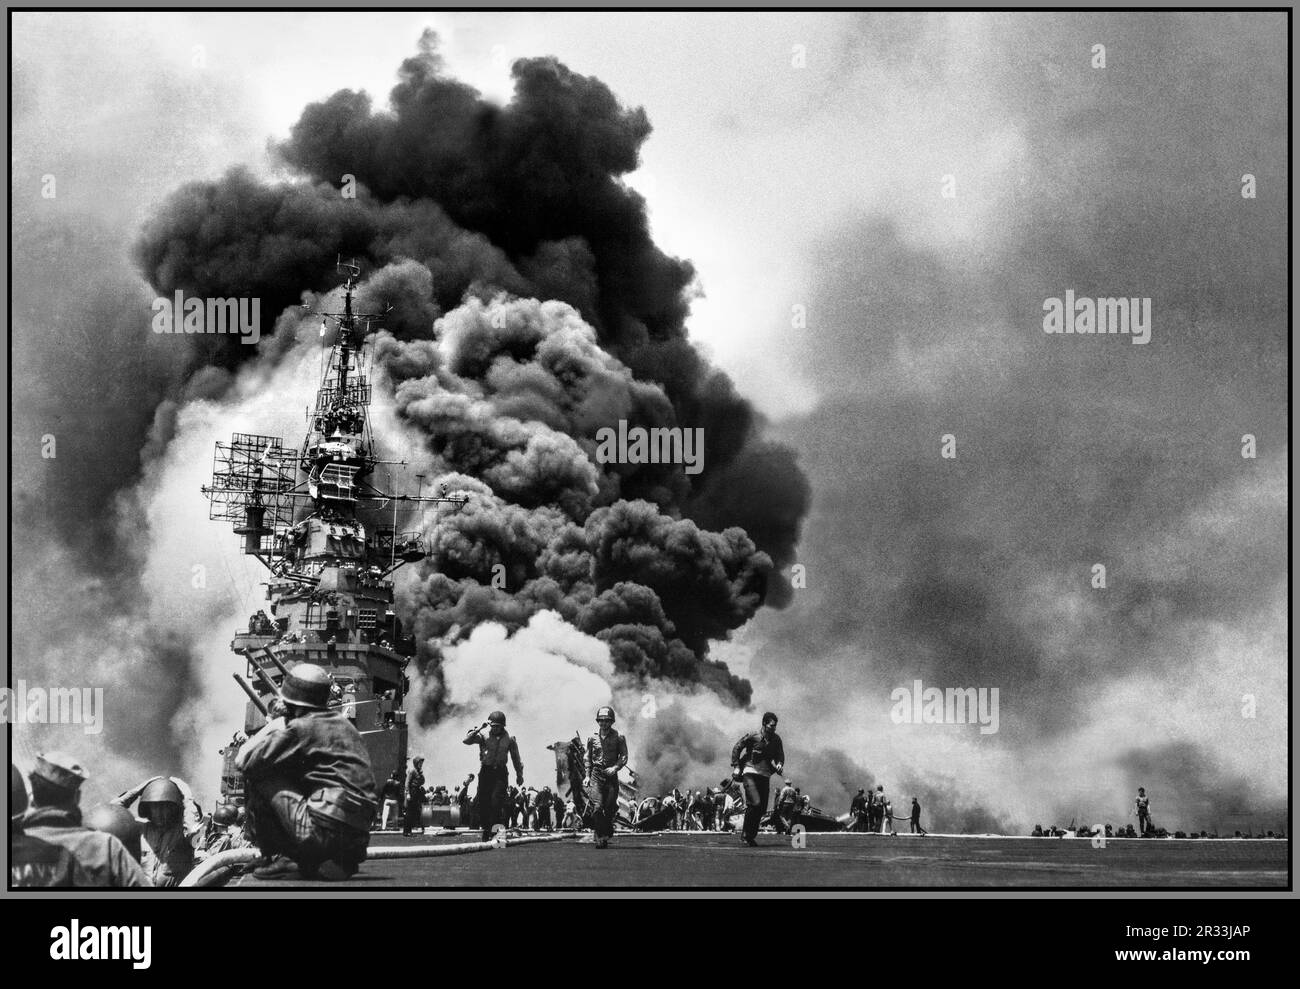 WW2 Pacific 'USS Bunker Hill” Aircraft carrier (CV-17) after being hit by two Kamikaze suicide Japanese aircraft in 30 seconds on 11 May 1945 off Kyushu. Dead-372. Wounded-264. World War II Second World War in the Pacific America USA / Imperial Japan Stock Photo